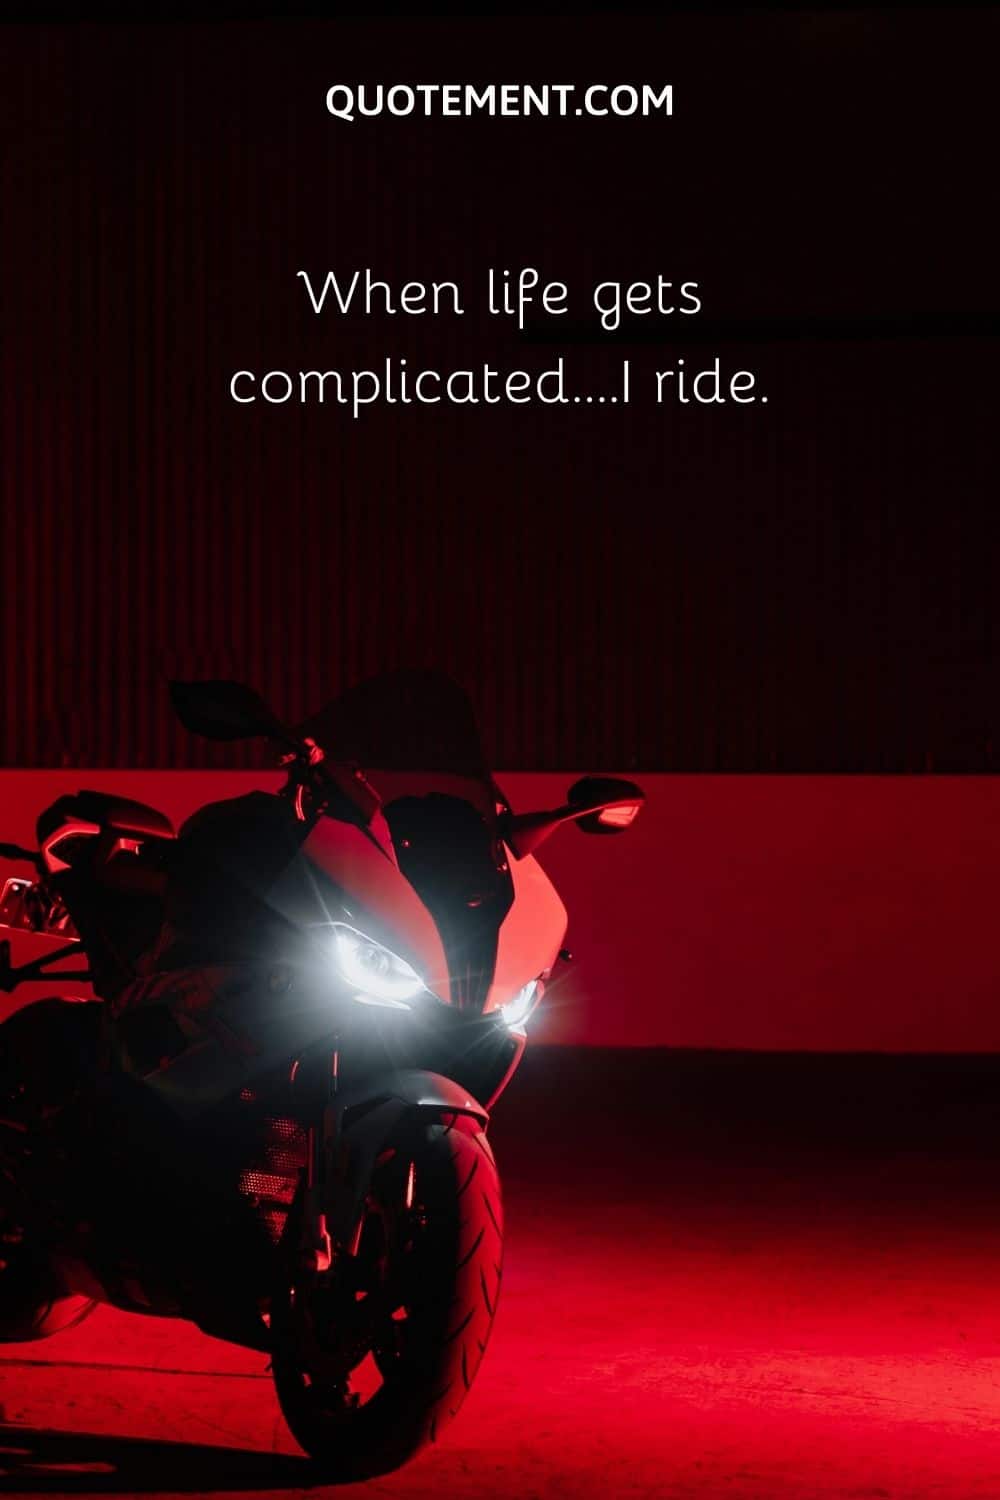 When life gets complicated….I ride.